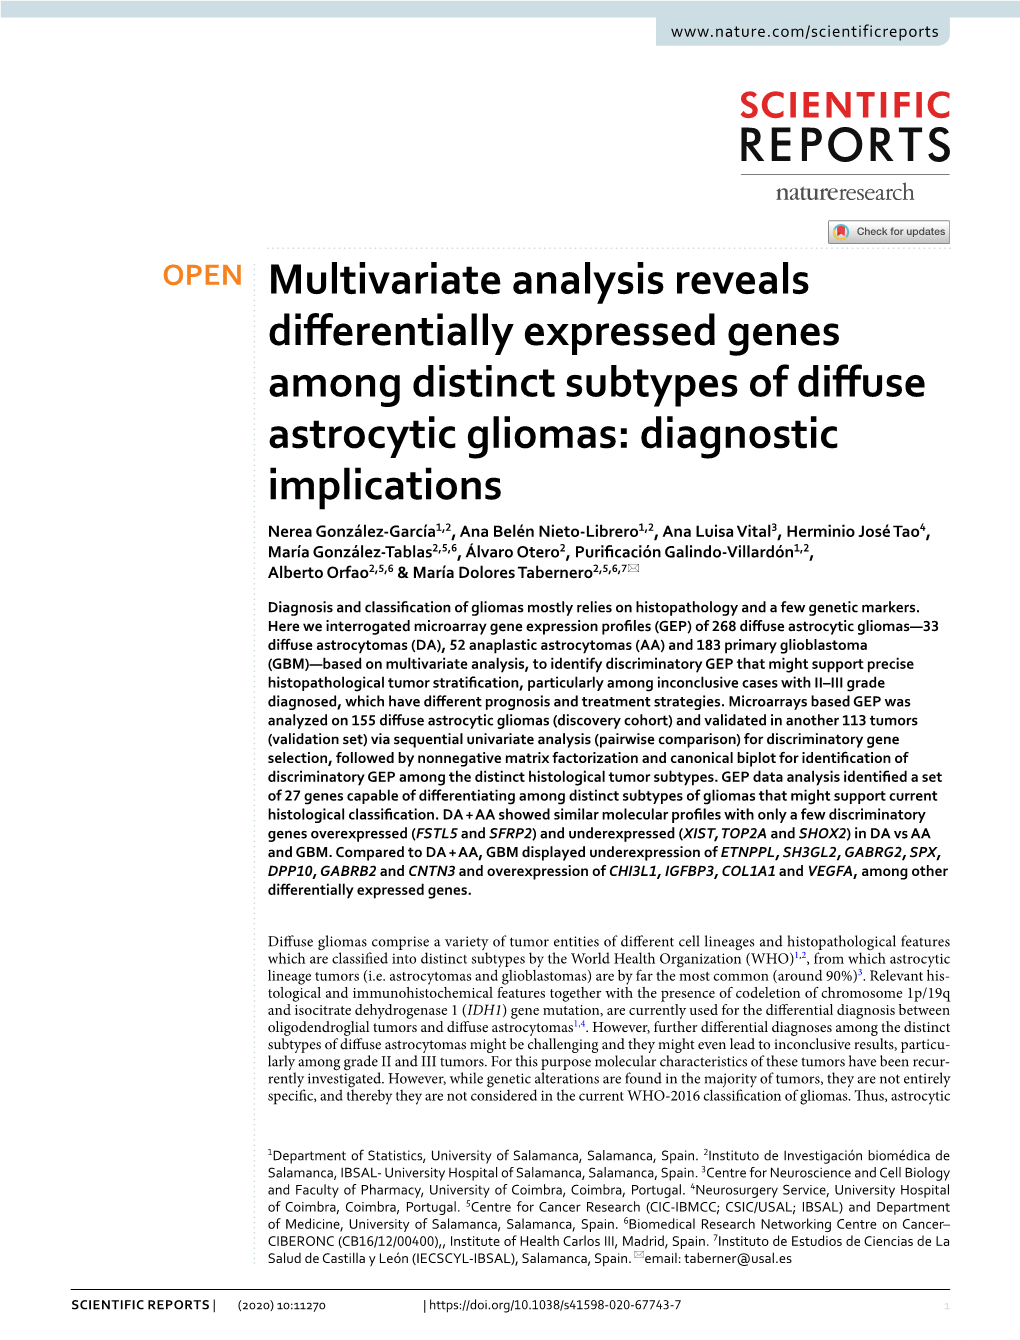 Multivariate Analysis Reveals Differentially Expressed Genes